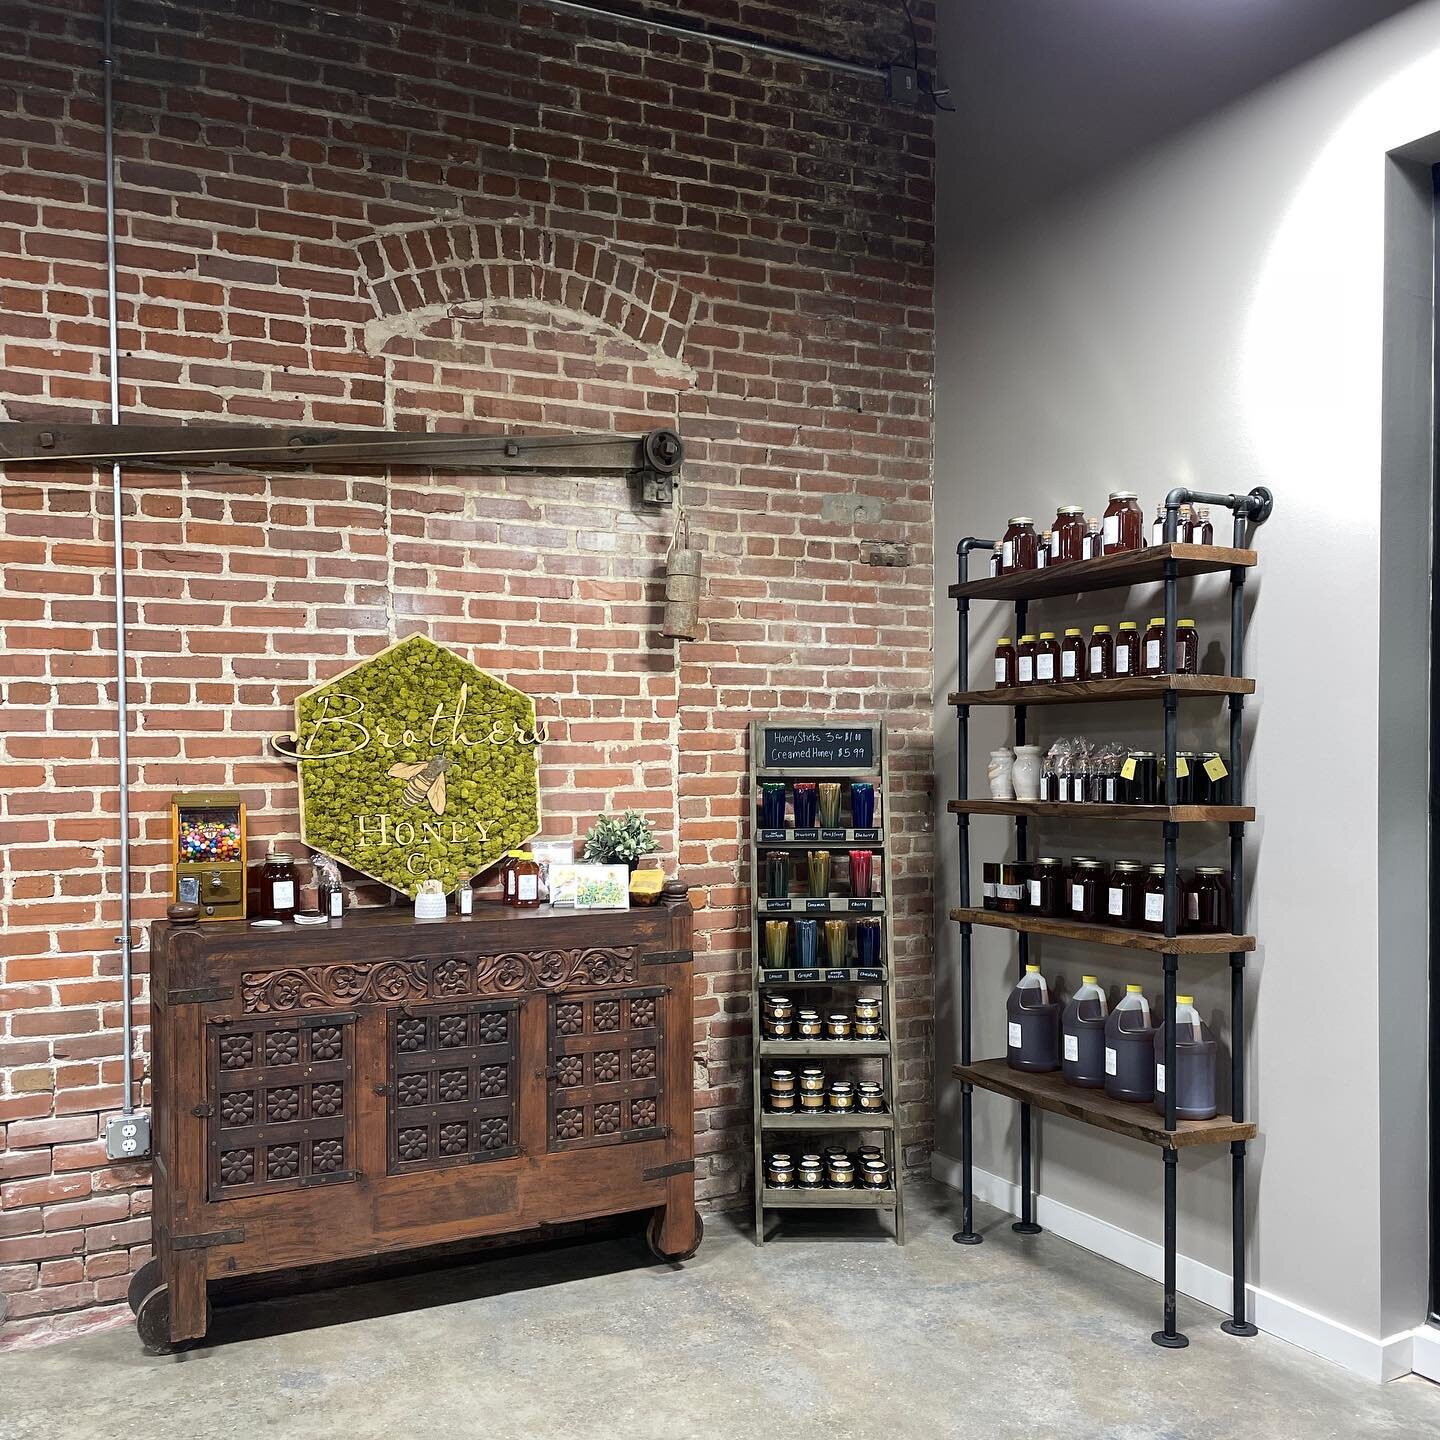 @sqtastingroom in downtown Conway is OPEN! Go see them, taste all the amazing things, and get some amazing oils/balsamics + honey!